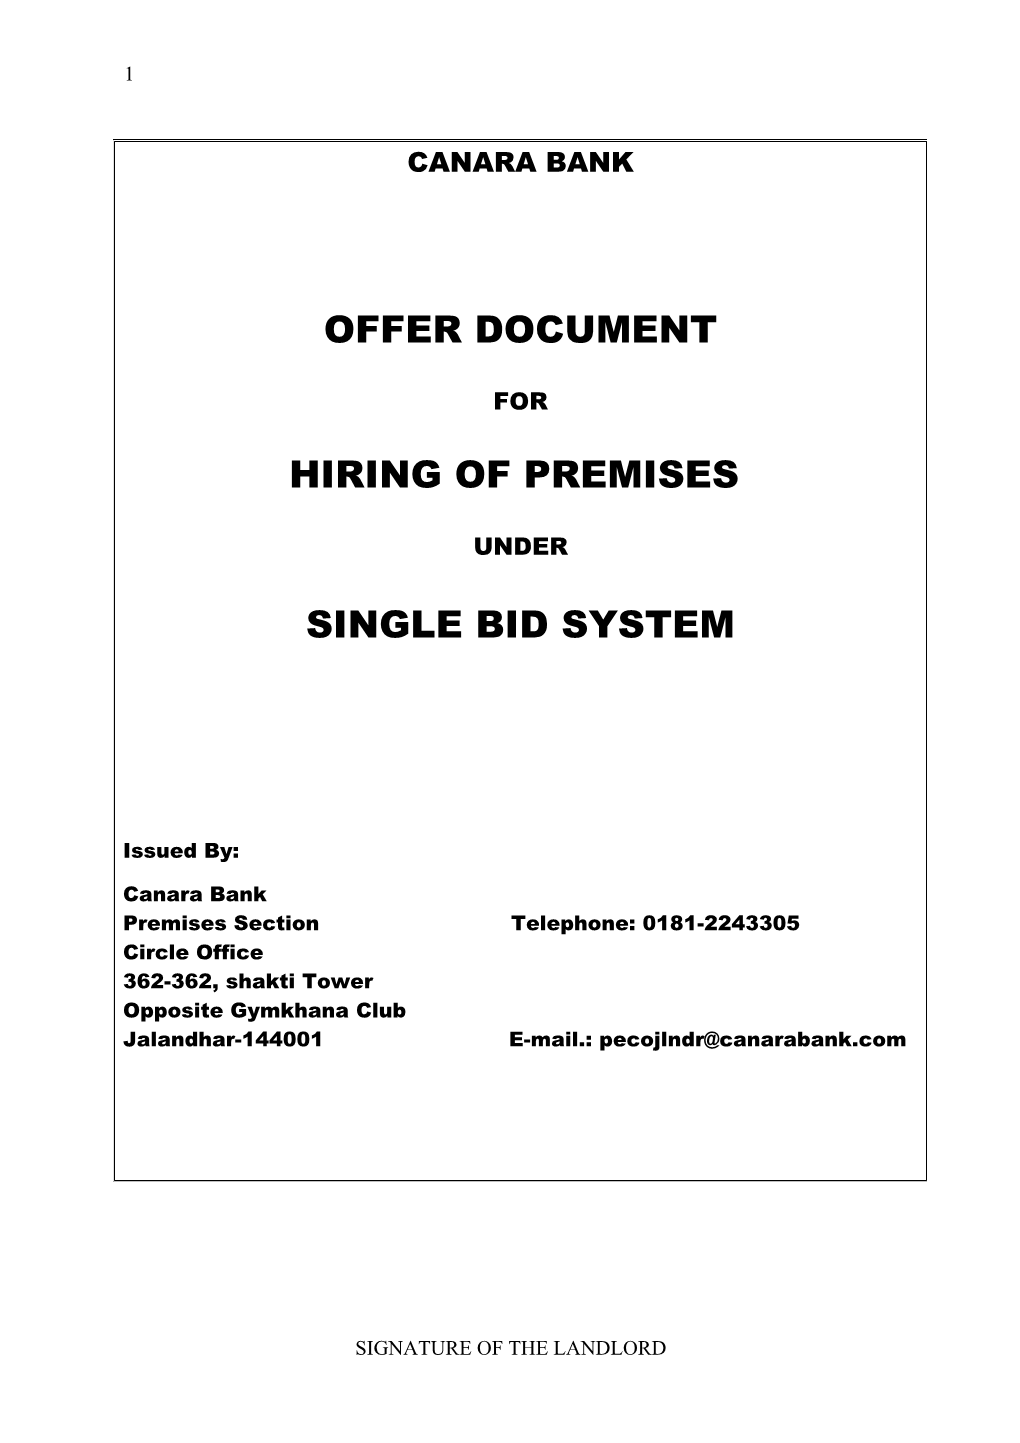 Offer Document Inviting Offers in Single-Bid System for Hiring Premises